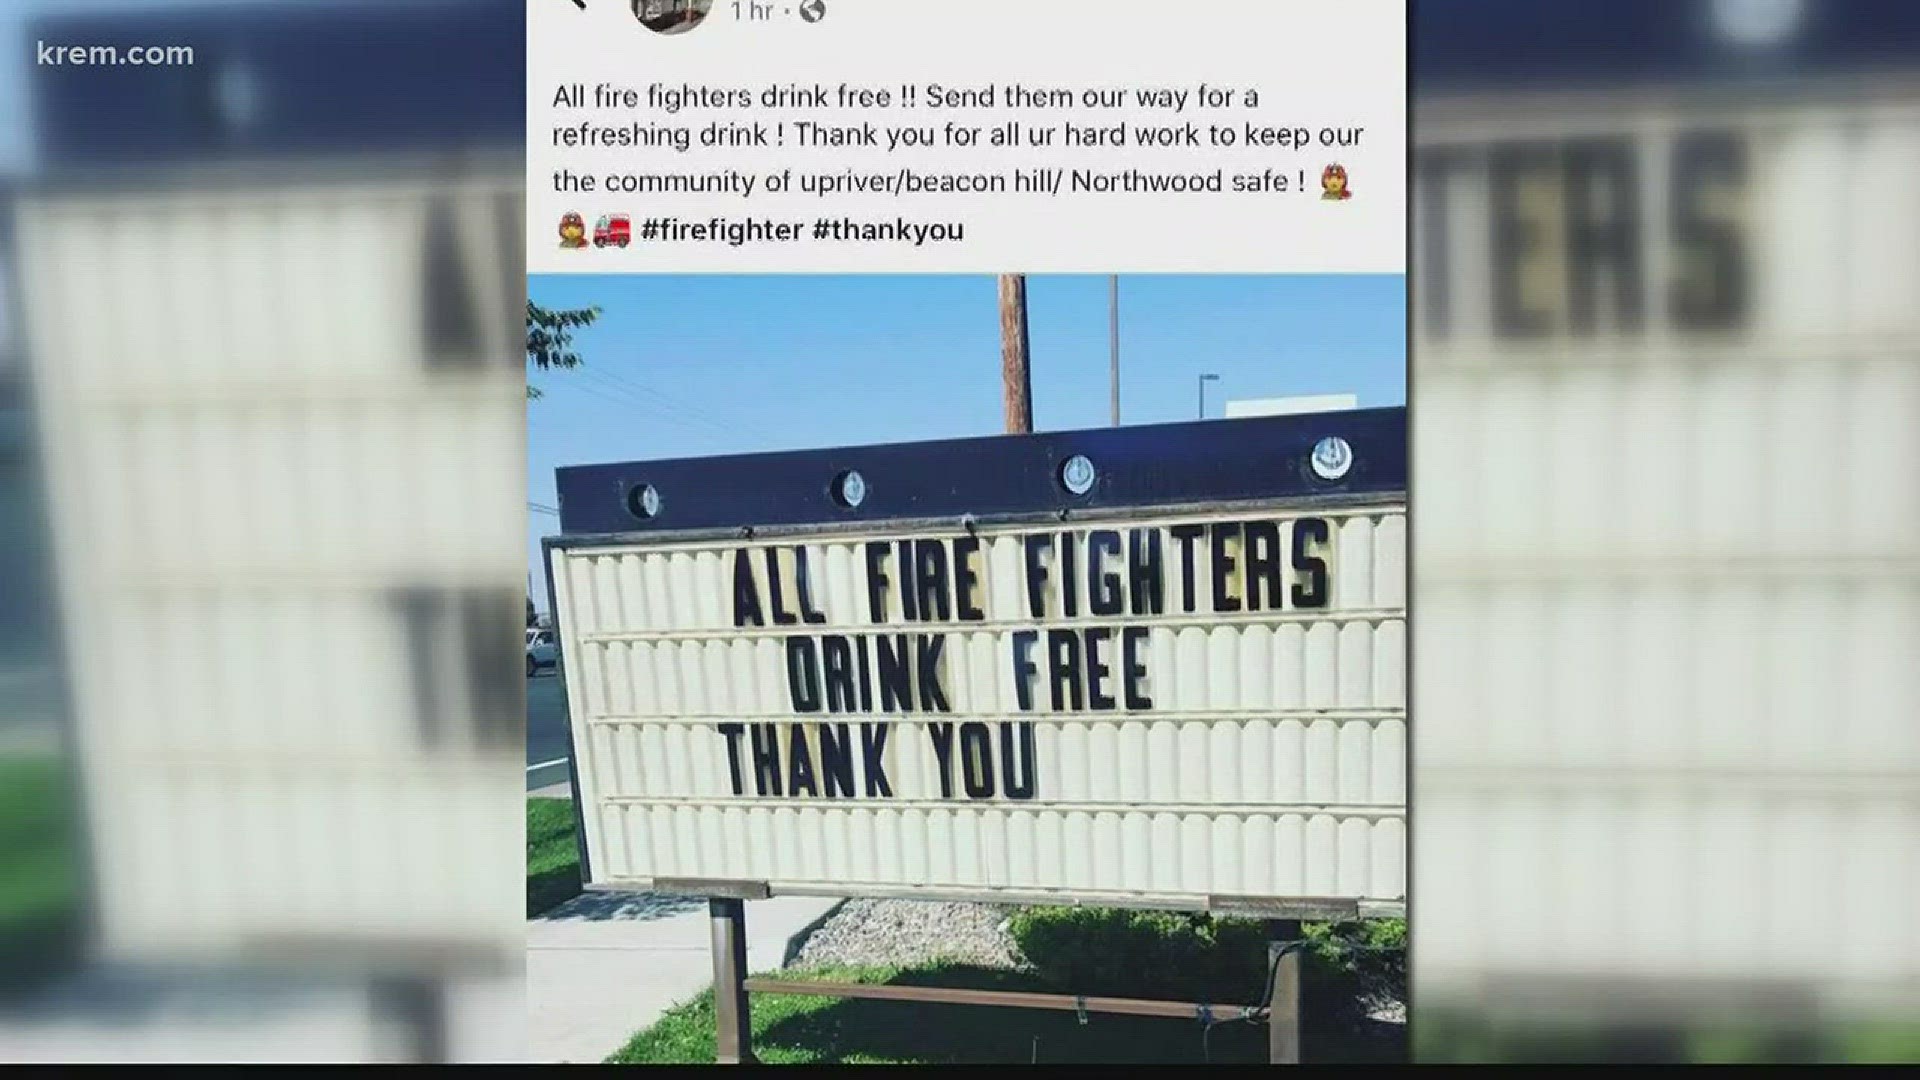 Local coffee stand offers free drinks for Spokane firefighters